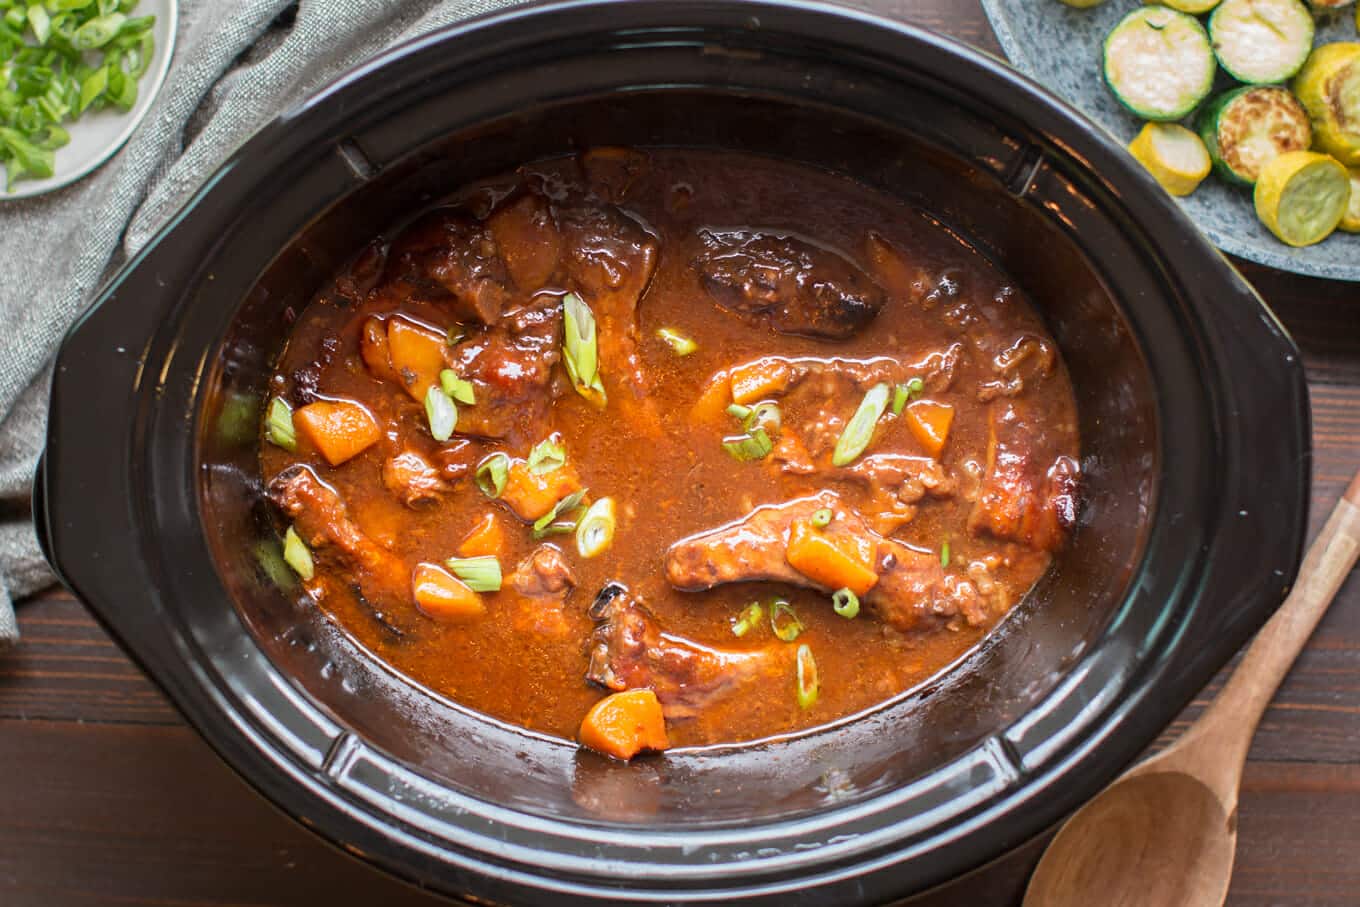 rib pieces in barbecue sauce cooked in slow cooker